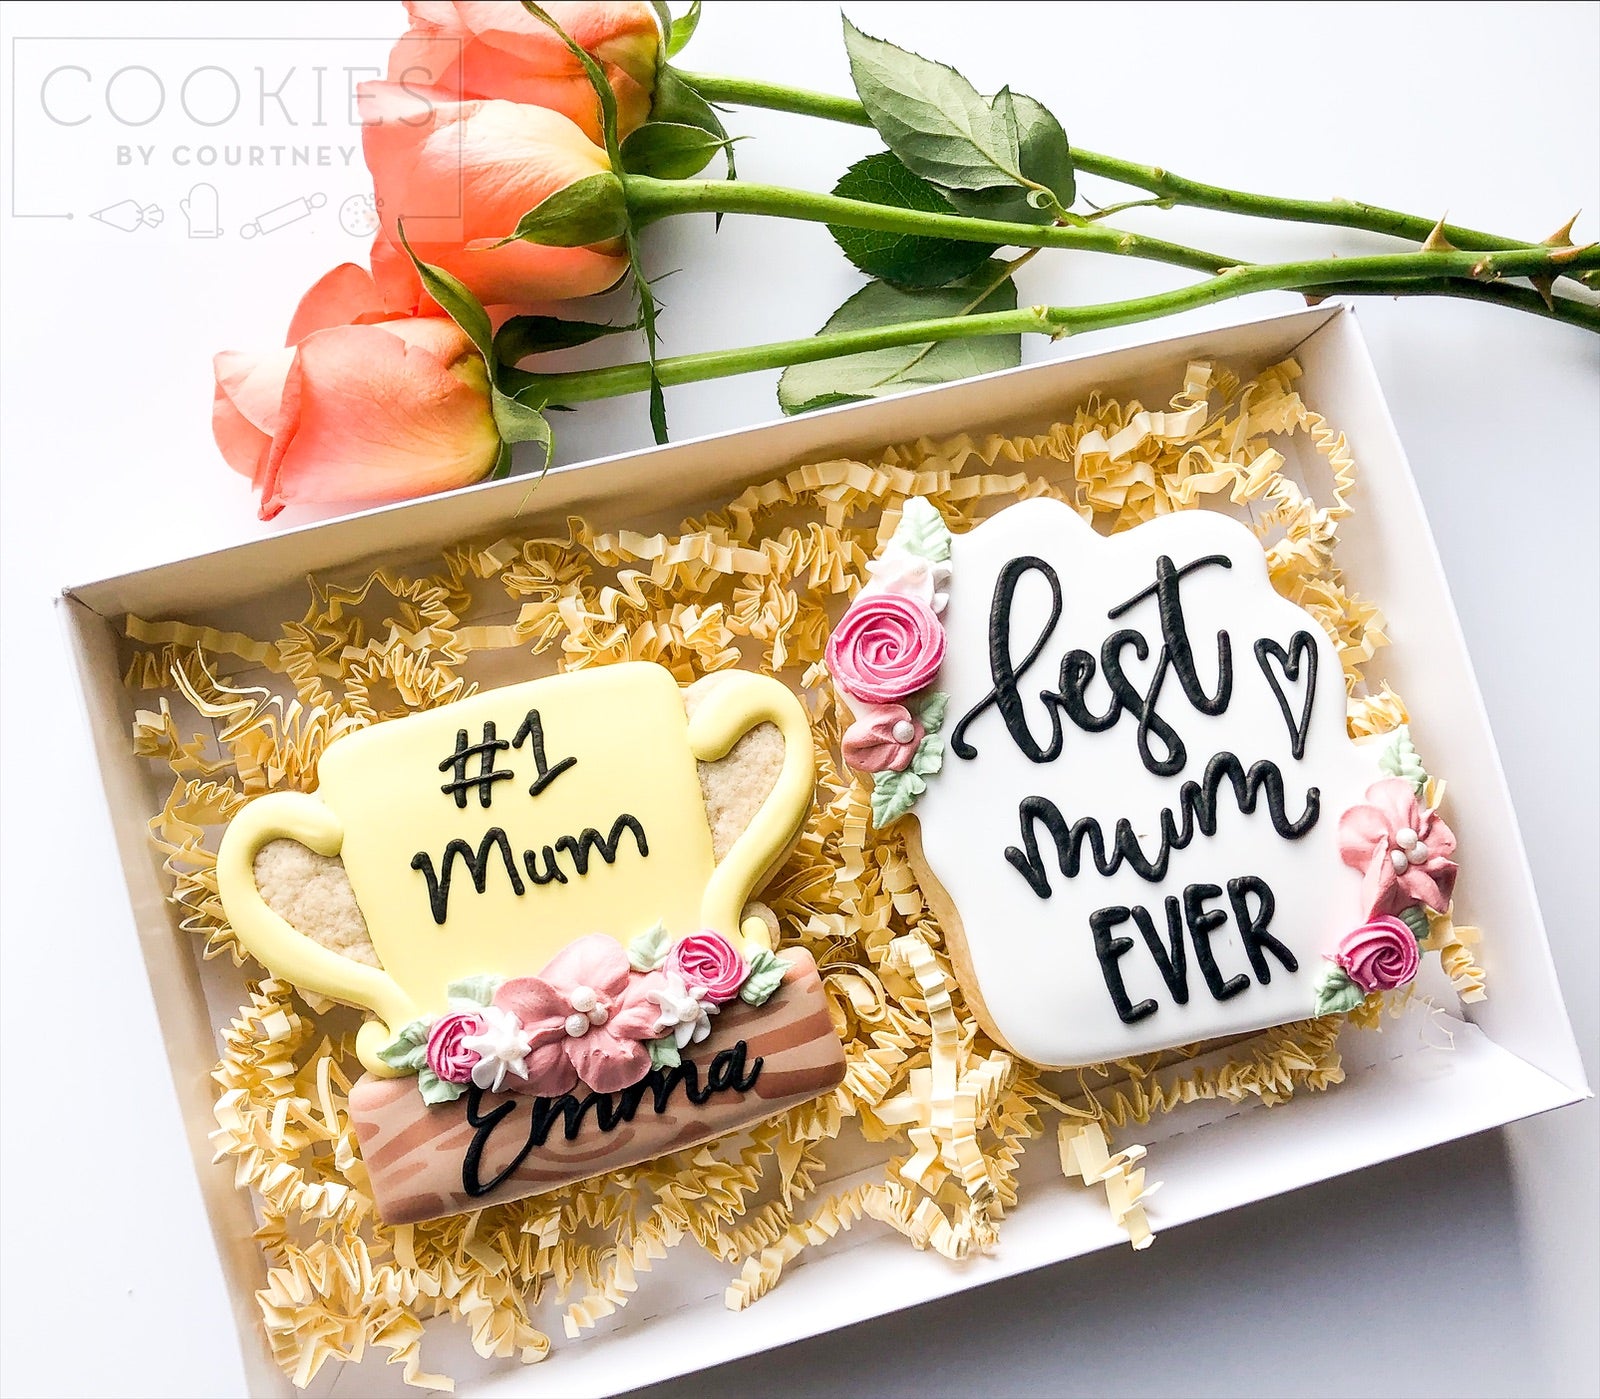 Mother’s Day cookies